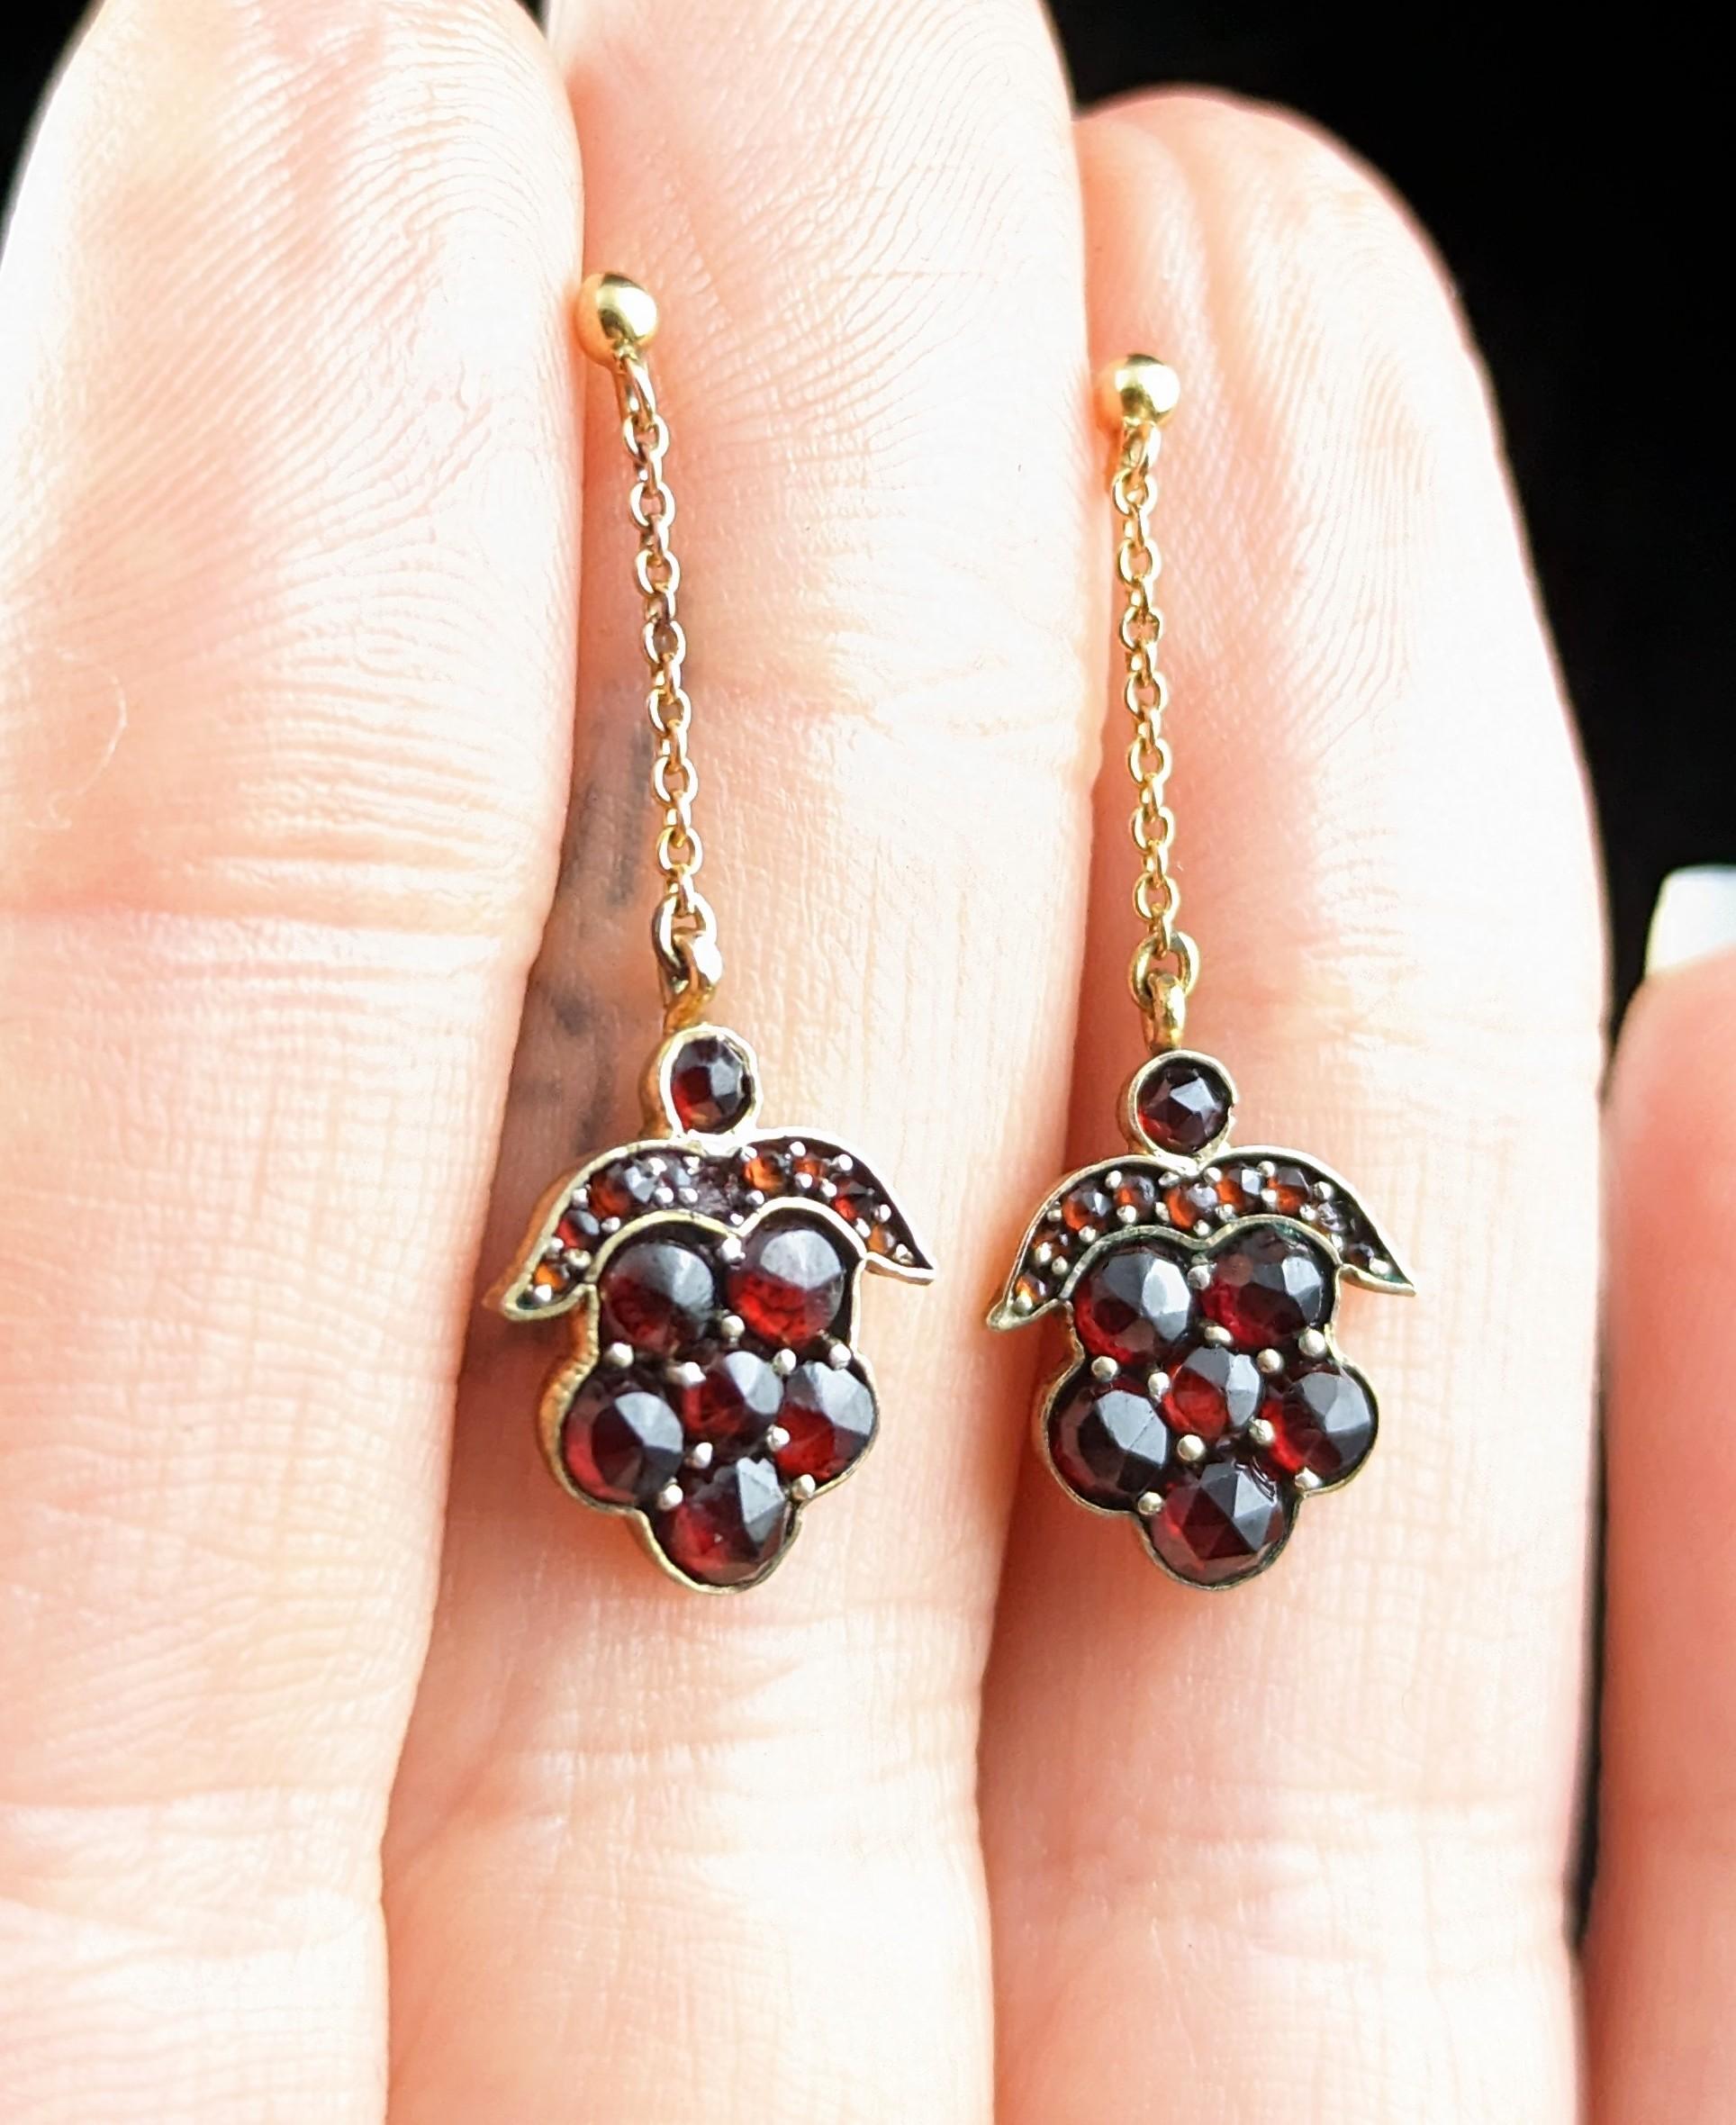 Antique Victorian Bohemian Garnet drop earrings in 8kt yellow gold.

These are such a pretty and delicate pair of earrings, the main drop made up from round cut Bohemian Garnets displayed in a floral design which also resembles a bunch of